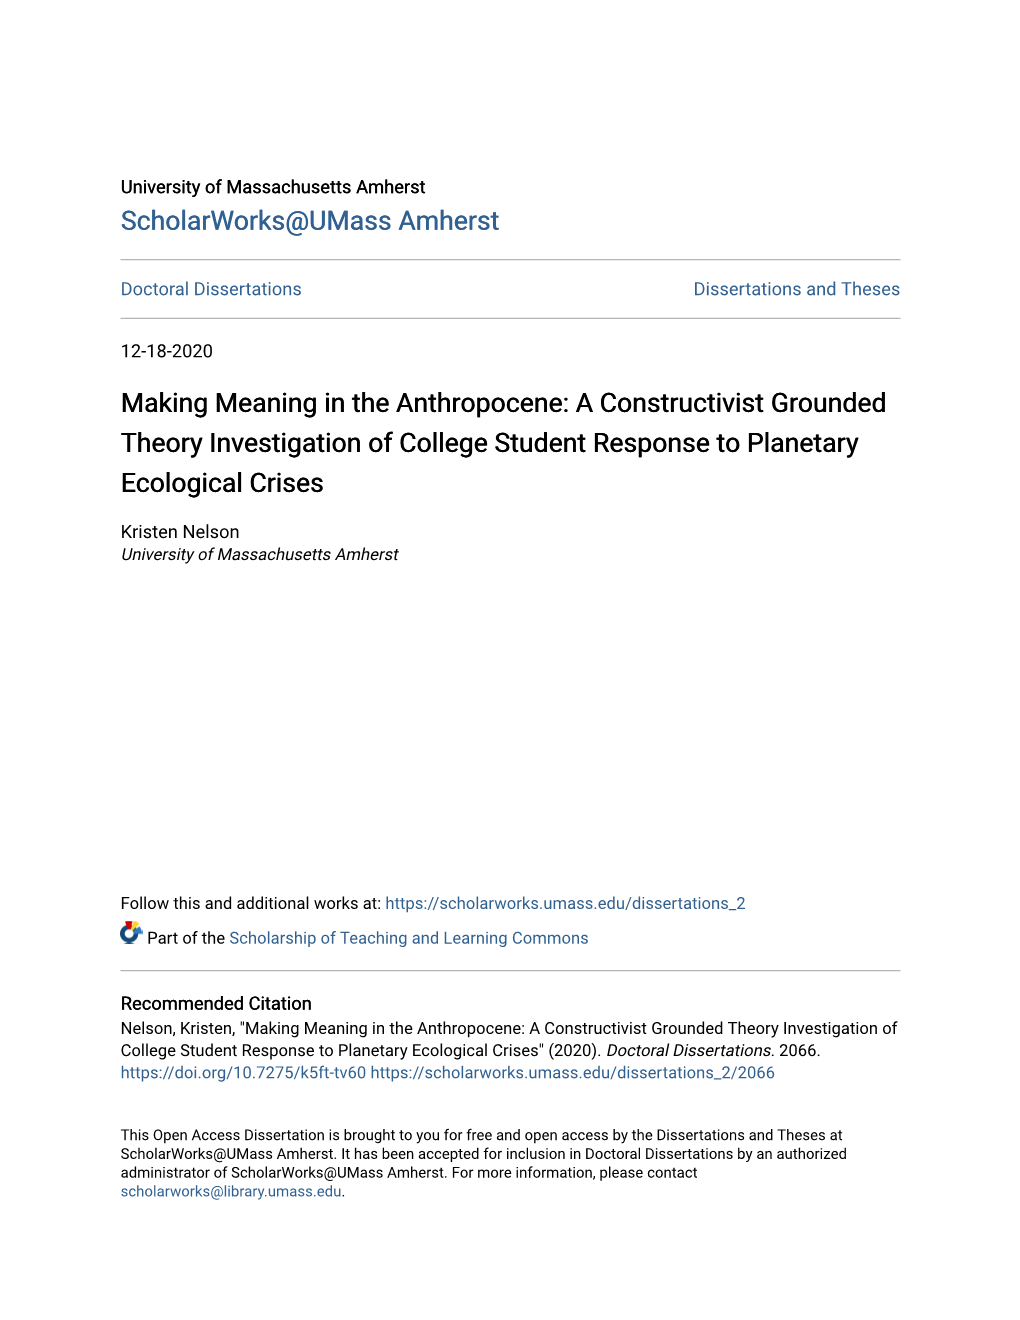 A Constructivist Grounded Theory Investigation of College Student Response to Planetary Ecological Crises